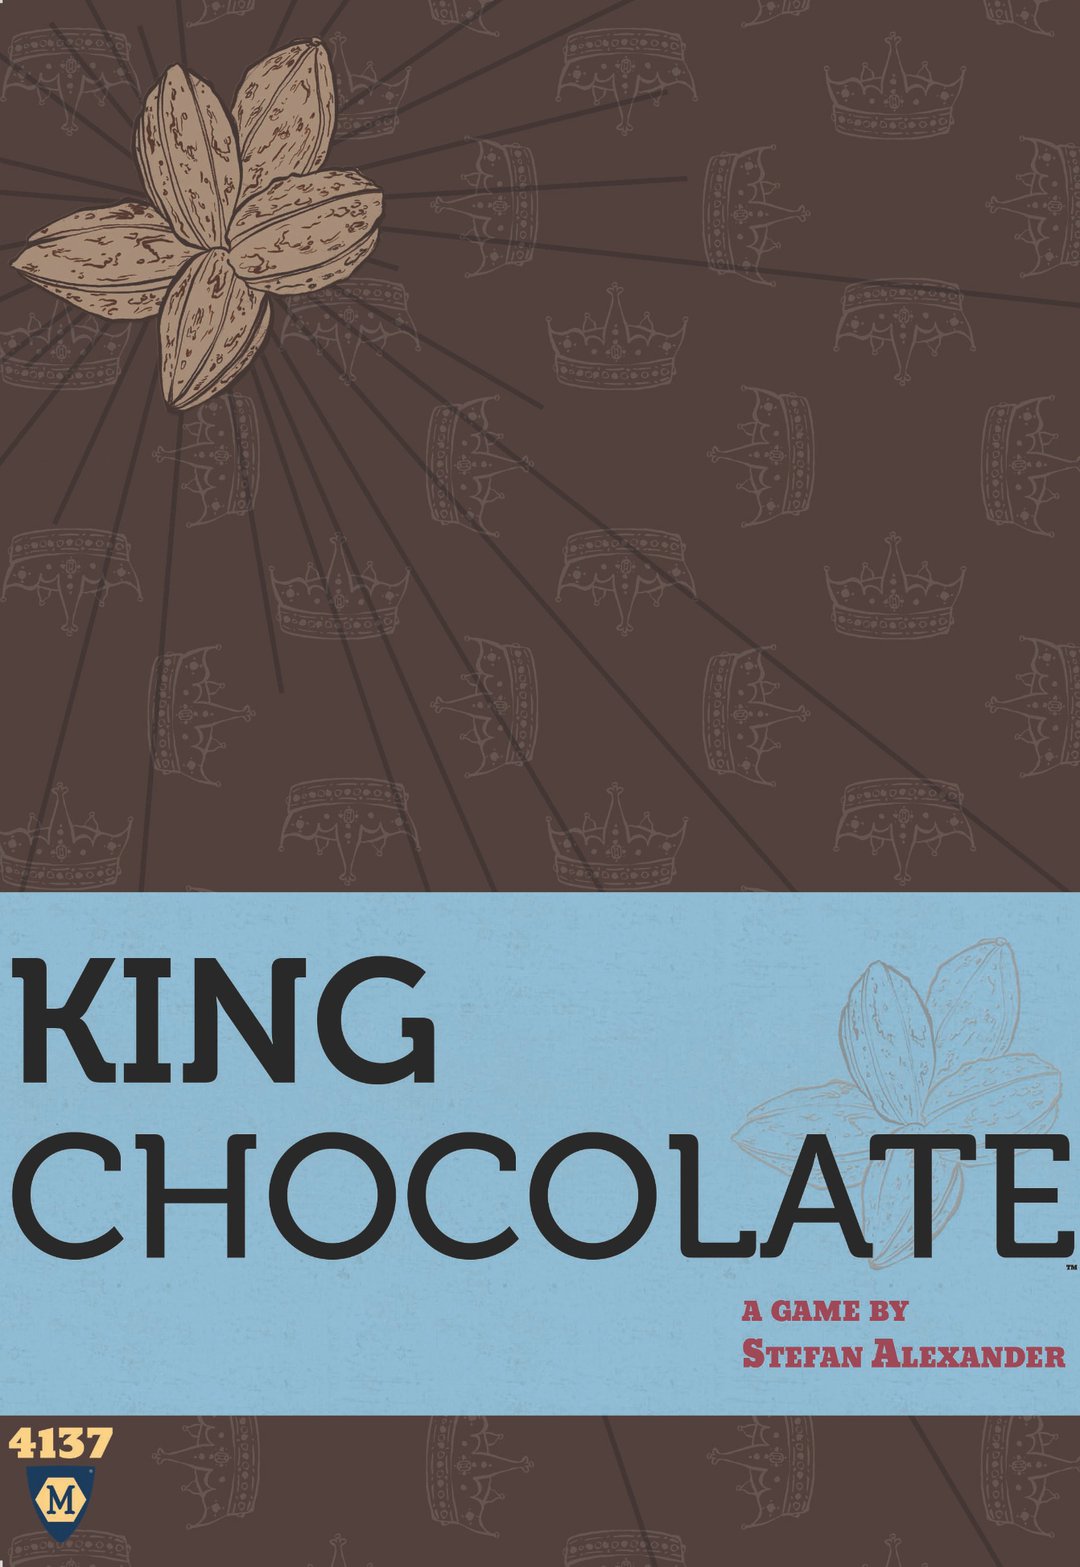 King Chocolate Review